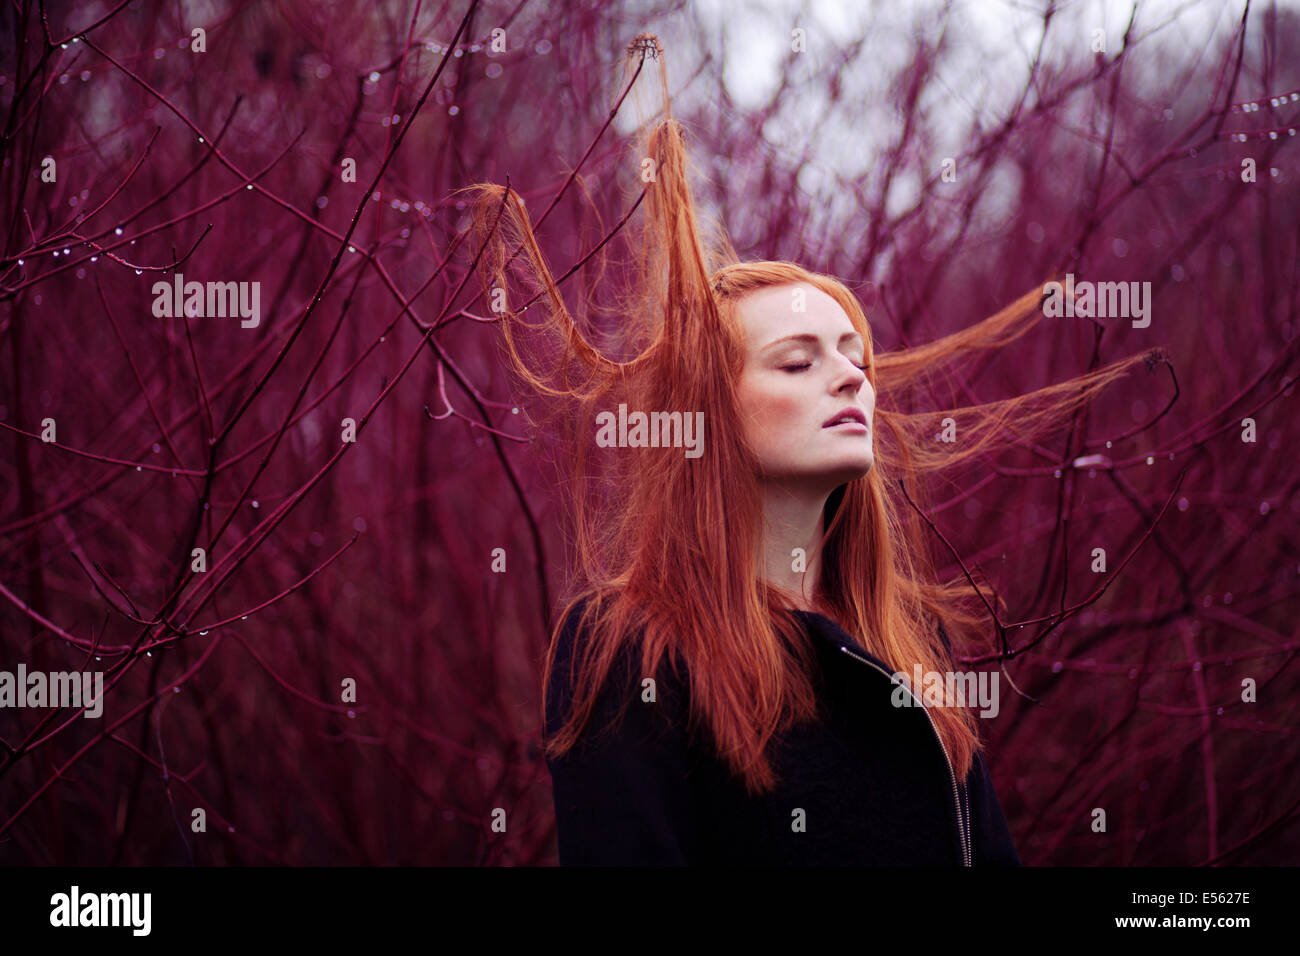 Woman with long red hair between branches, portrait Stock Photo